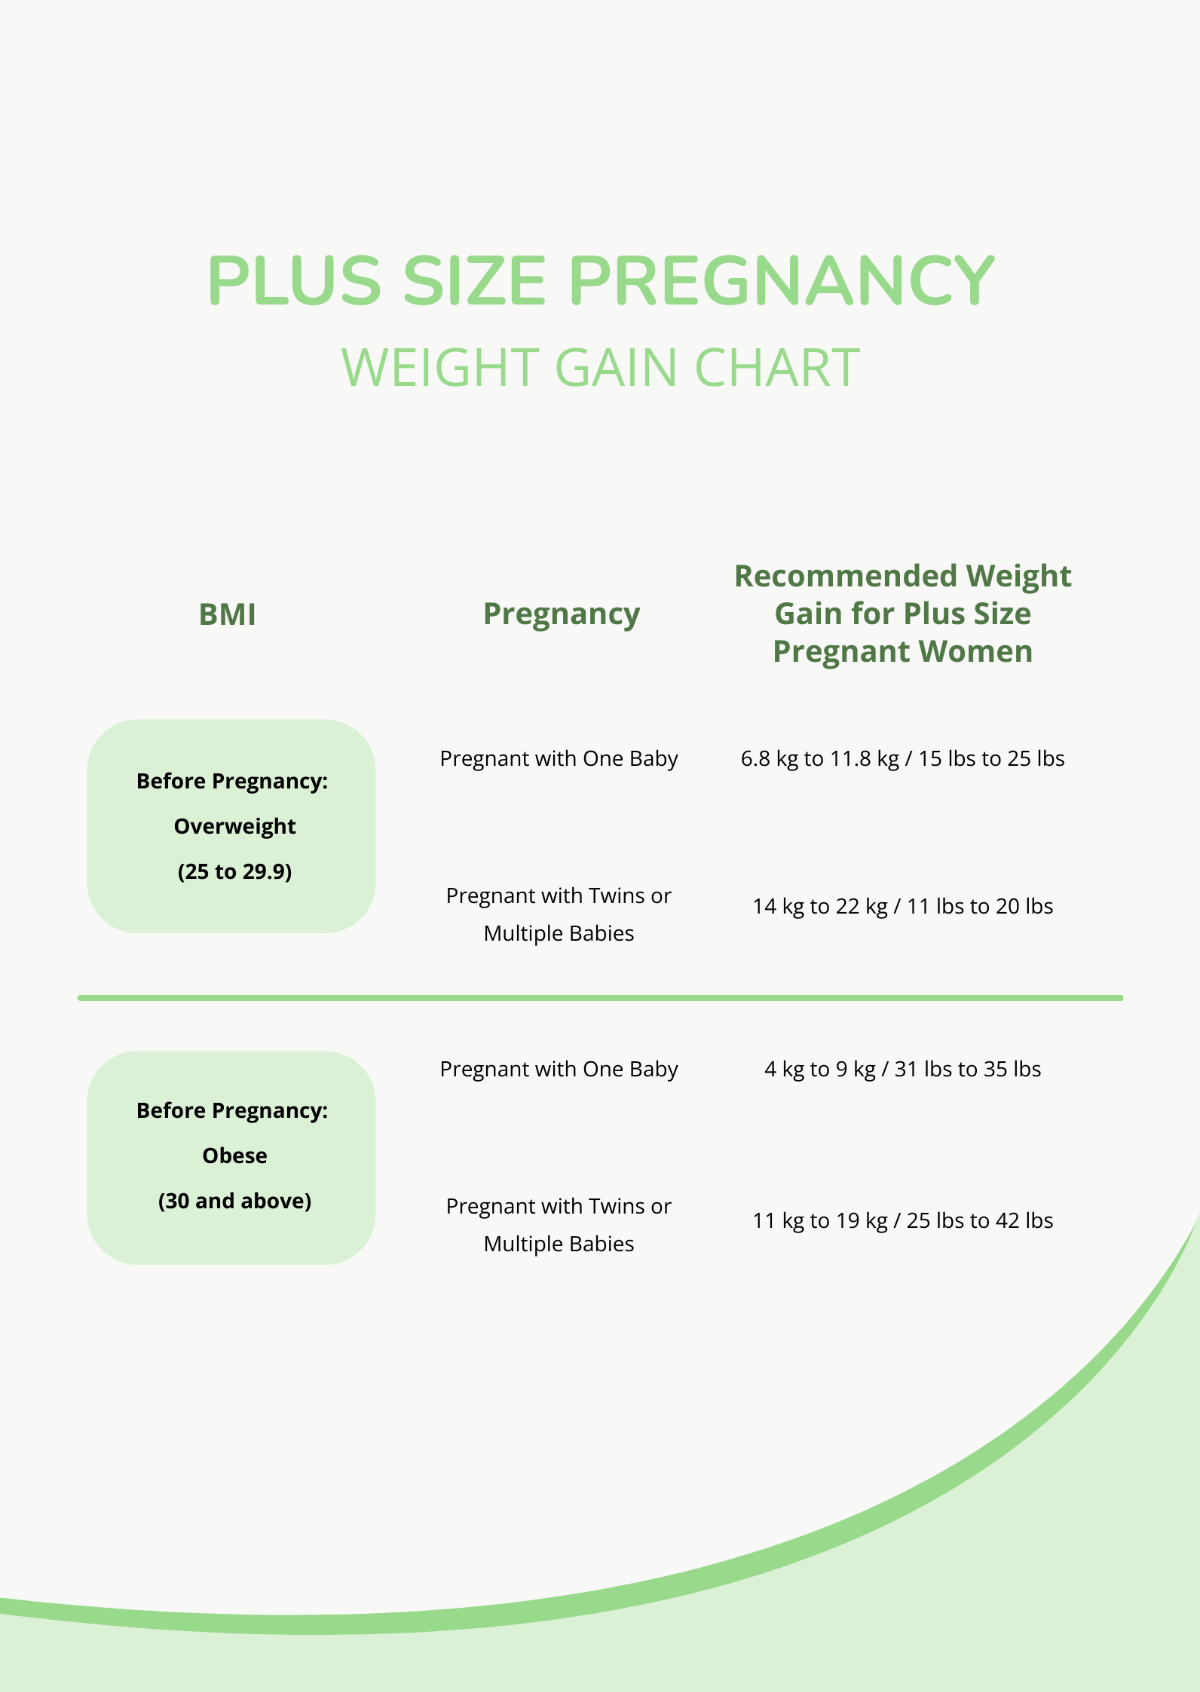 Plus Size Pregnancy Weight Gain Chart Template